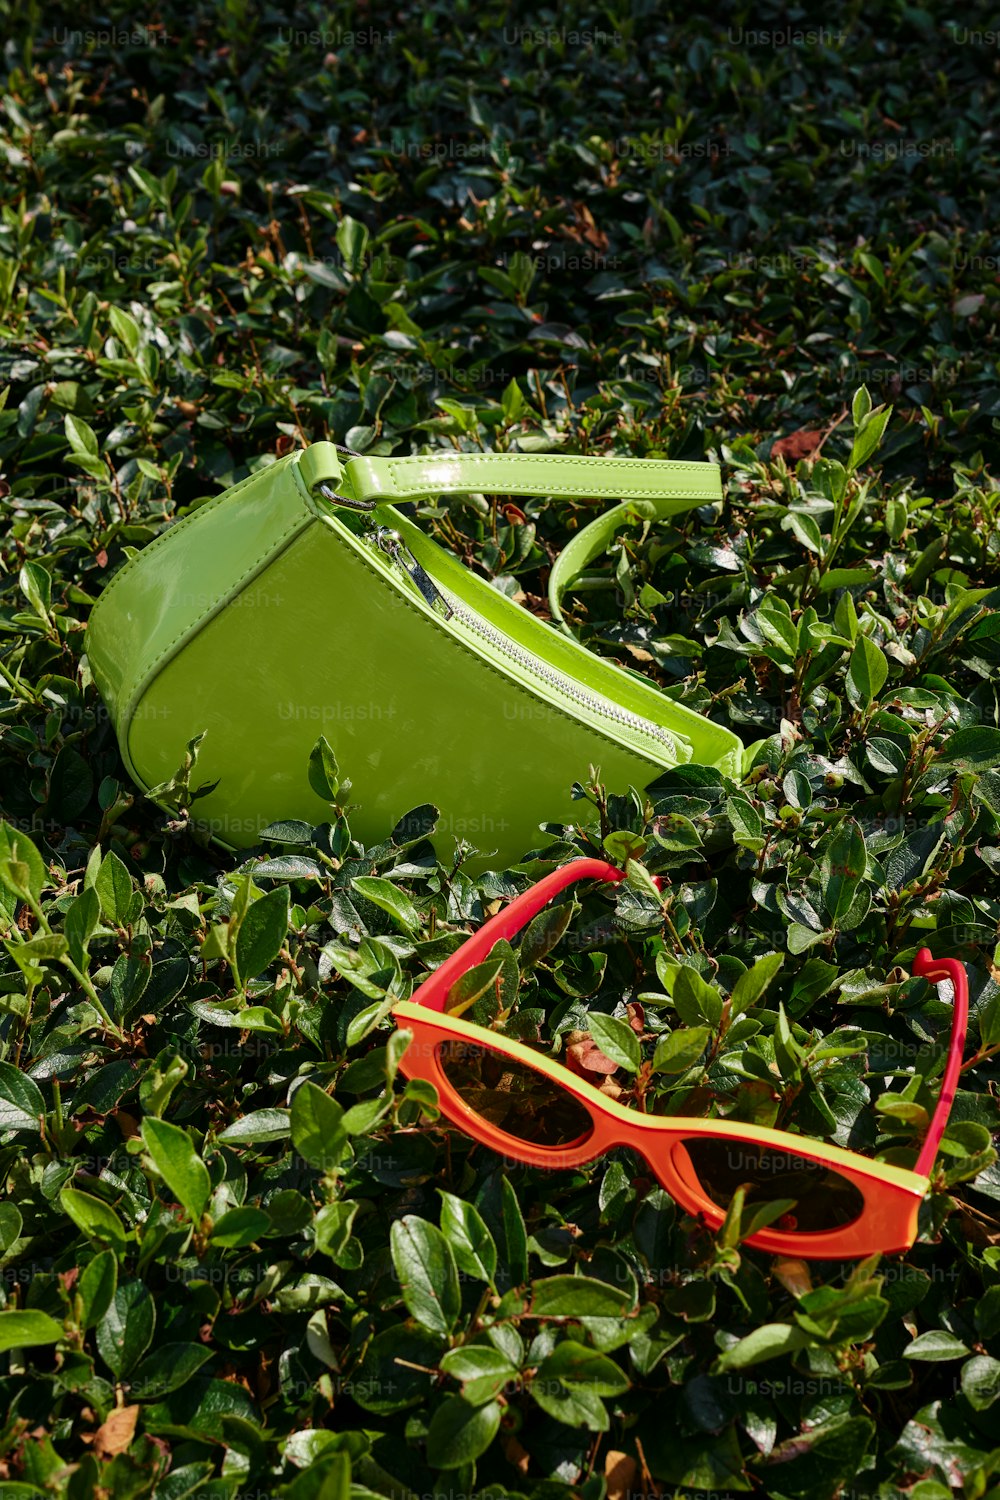 a pair of sunglasses and a green case laying in the grass